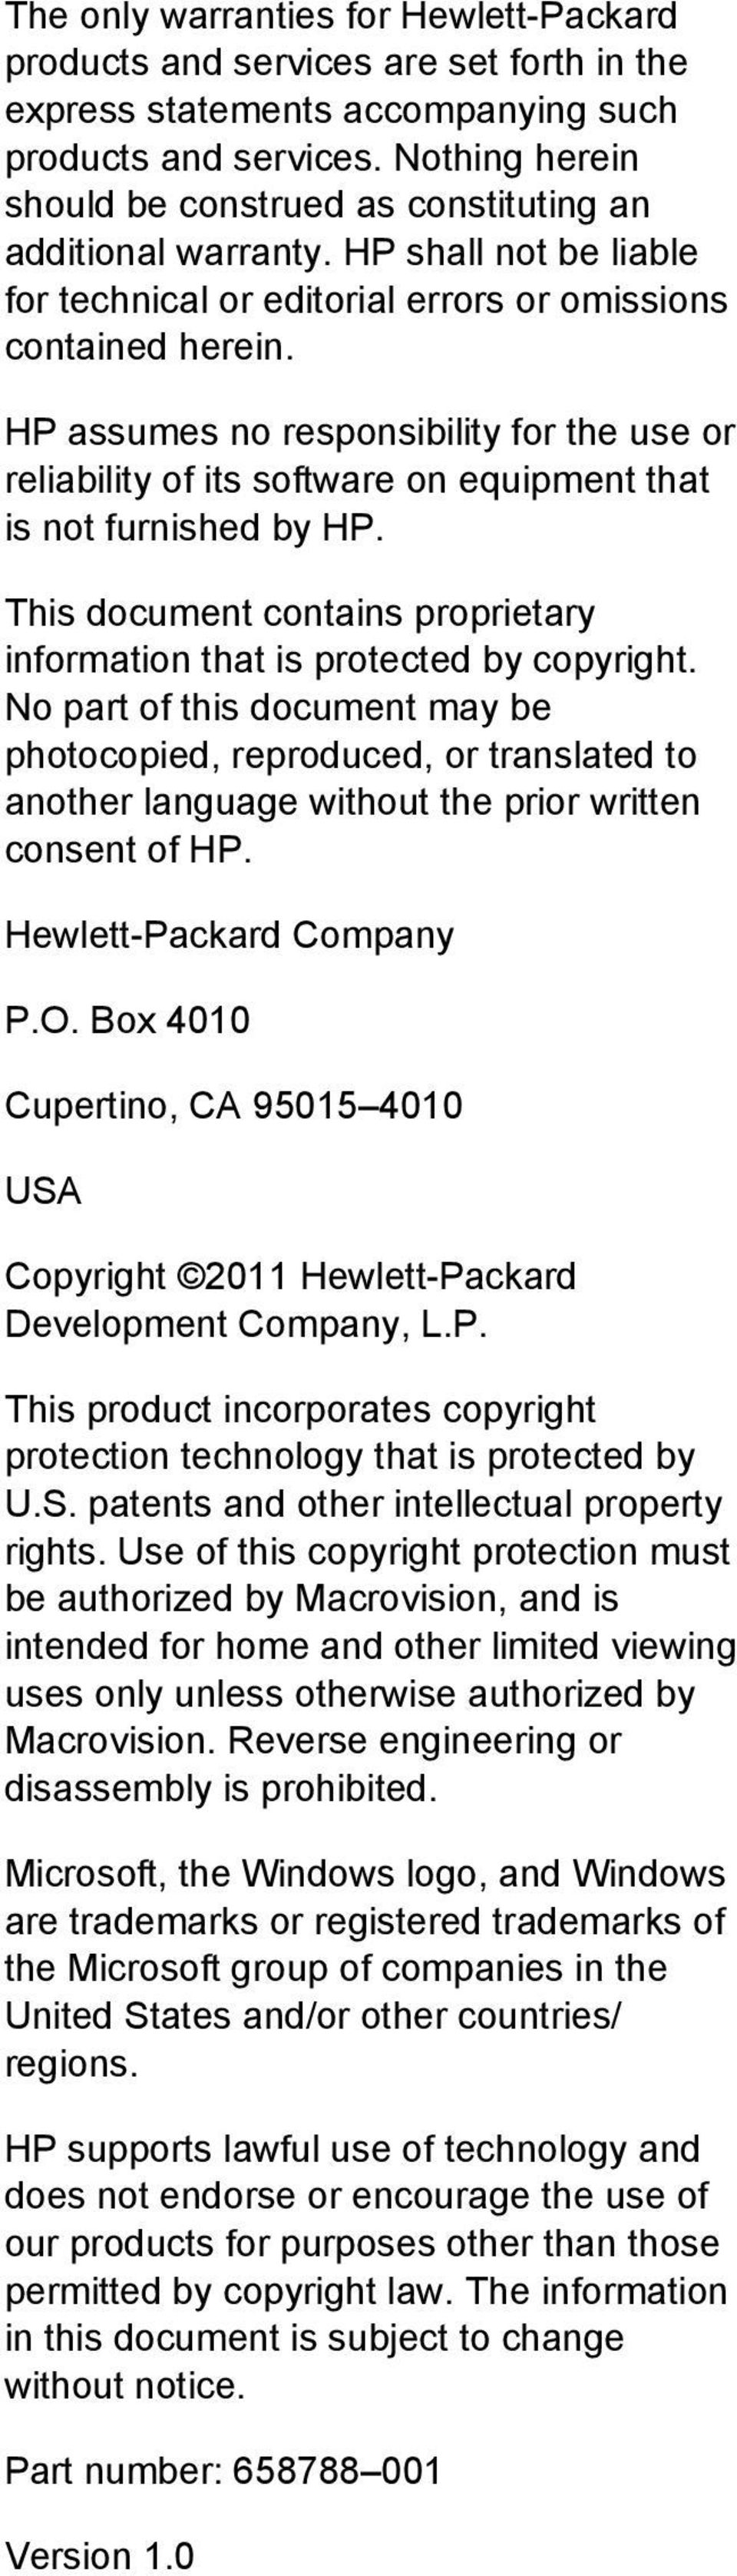 HP assumes no responsibility for the use or reliability of its software on equipment that is not furnished by HP. This document contains proprietary information that is protected by copyright.